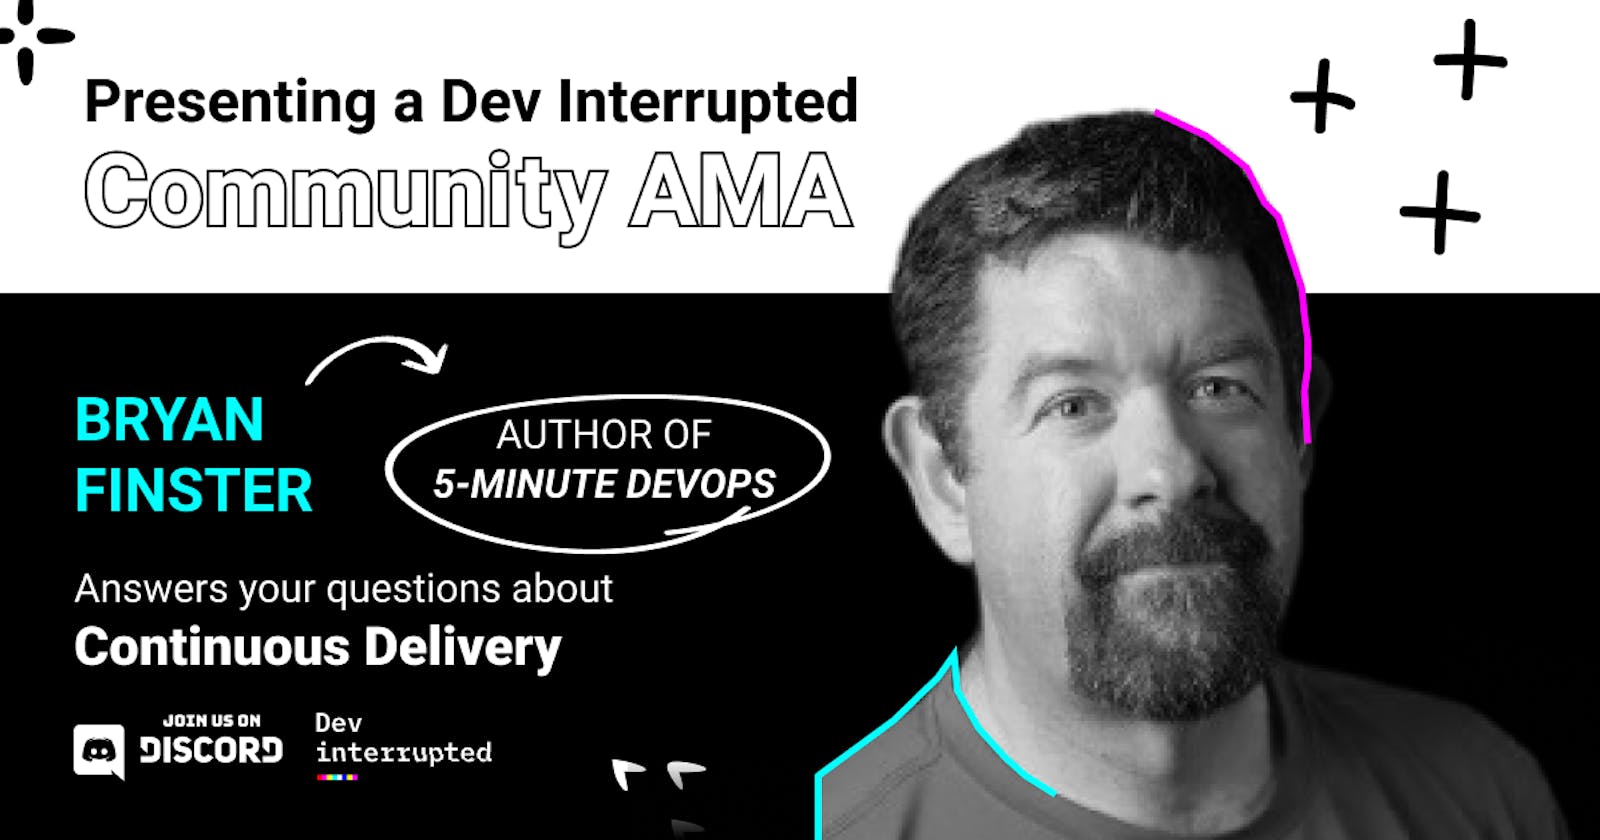 Community AMA: Bryan Finster and Continuous Delivery